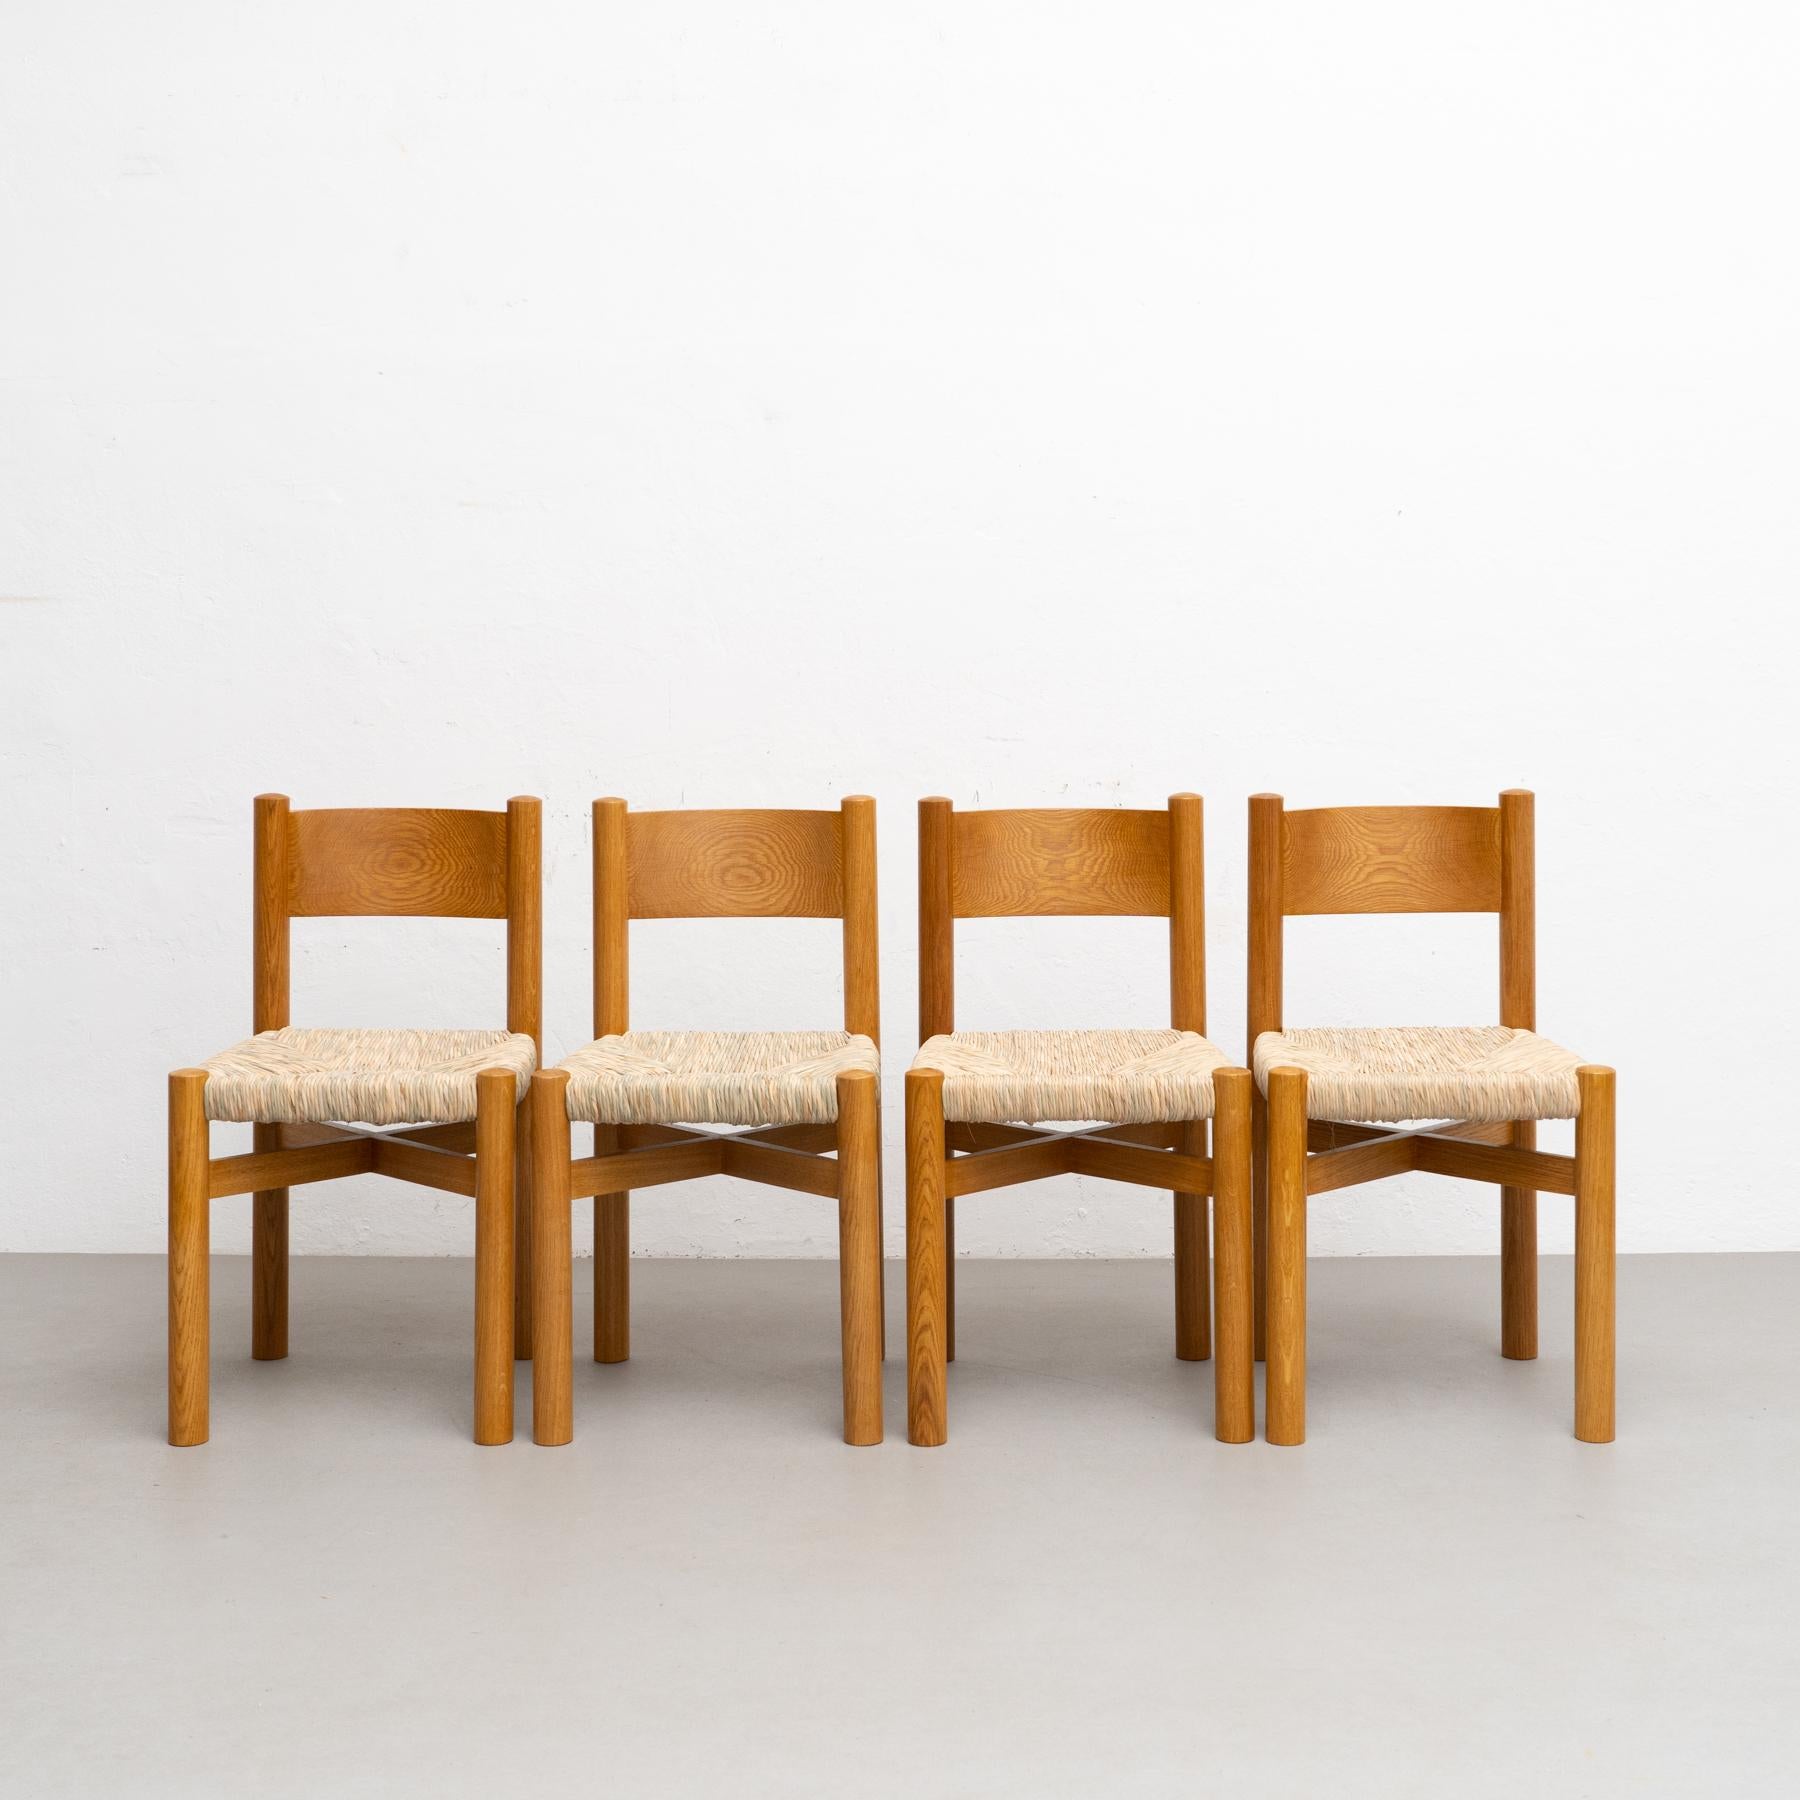 Set of Four Chairs After Charlotte Perriand, 
by unknown manufacturer, circa 1980 in France.

Materials:
Wood and rattan.

In original condition, with minor wear consistent with age and use, preserving a beautiful patina.

